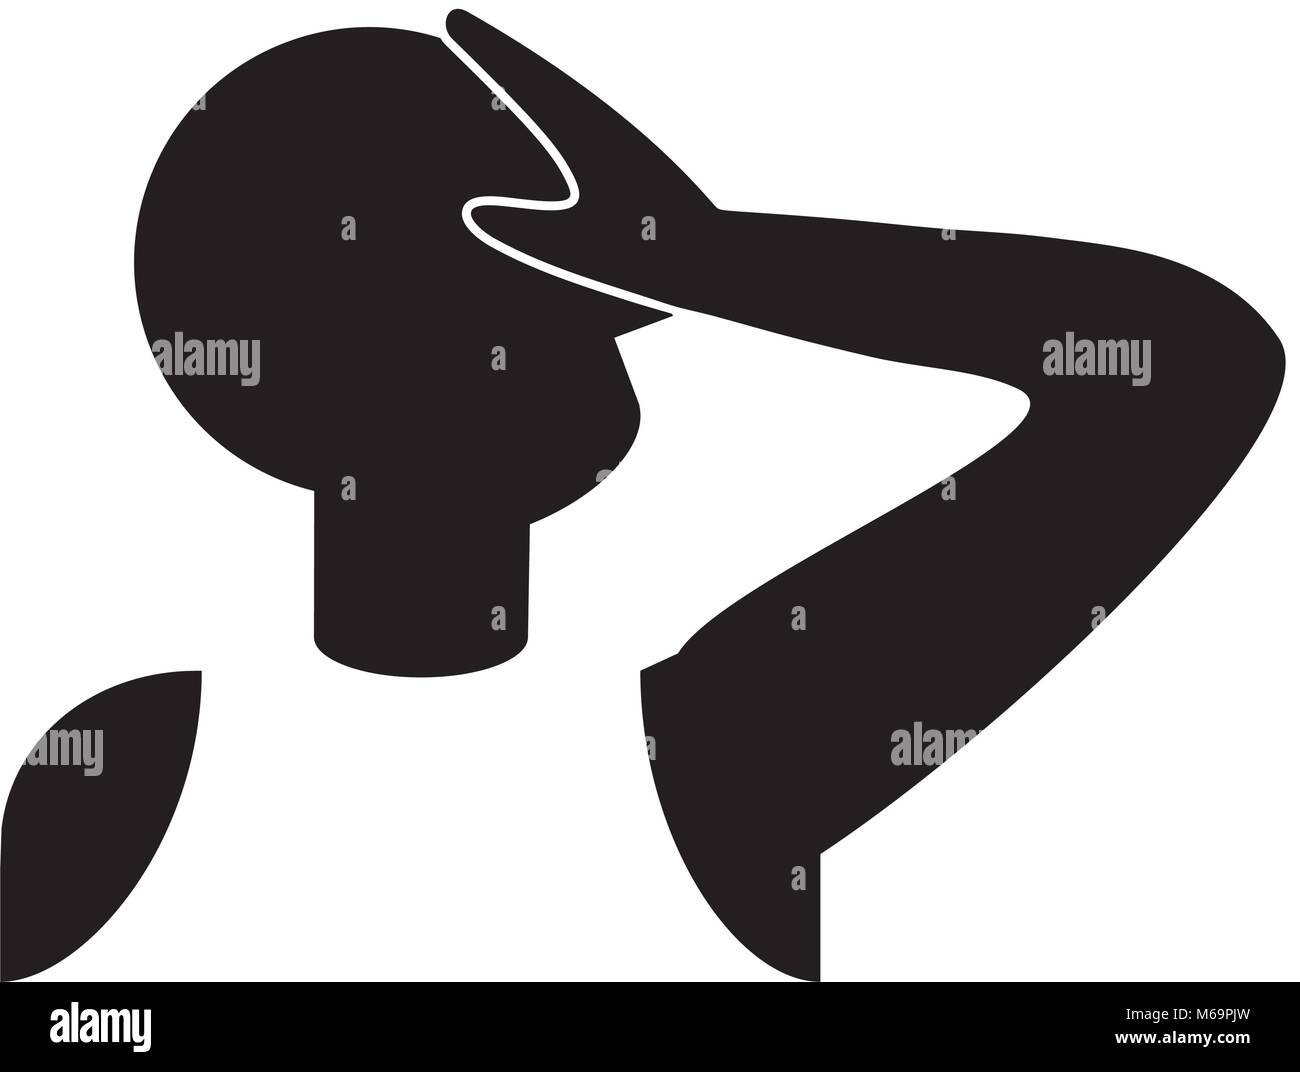 Facepalm - gesture of frustration, disappointment or embarrassment Stock Vector